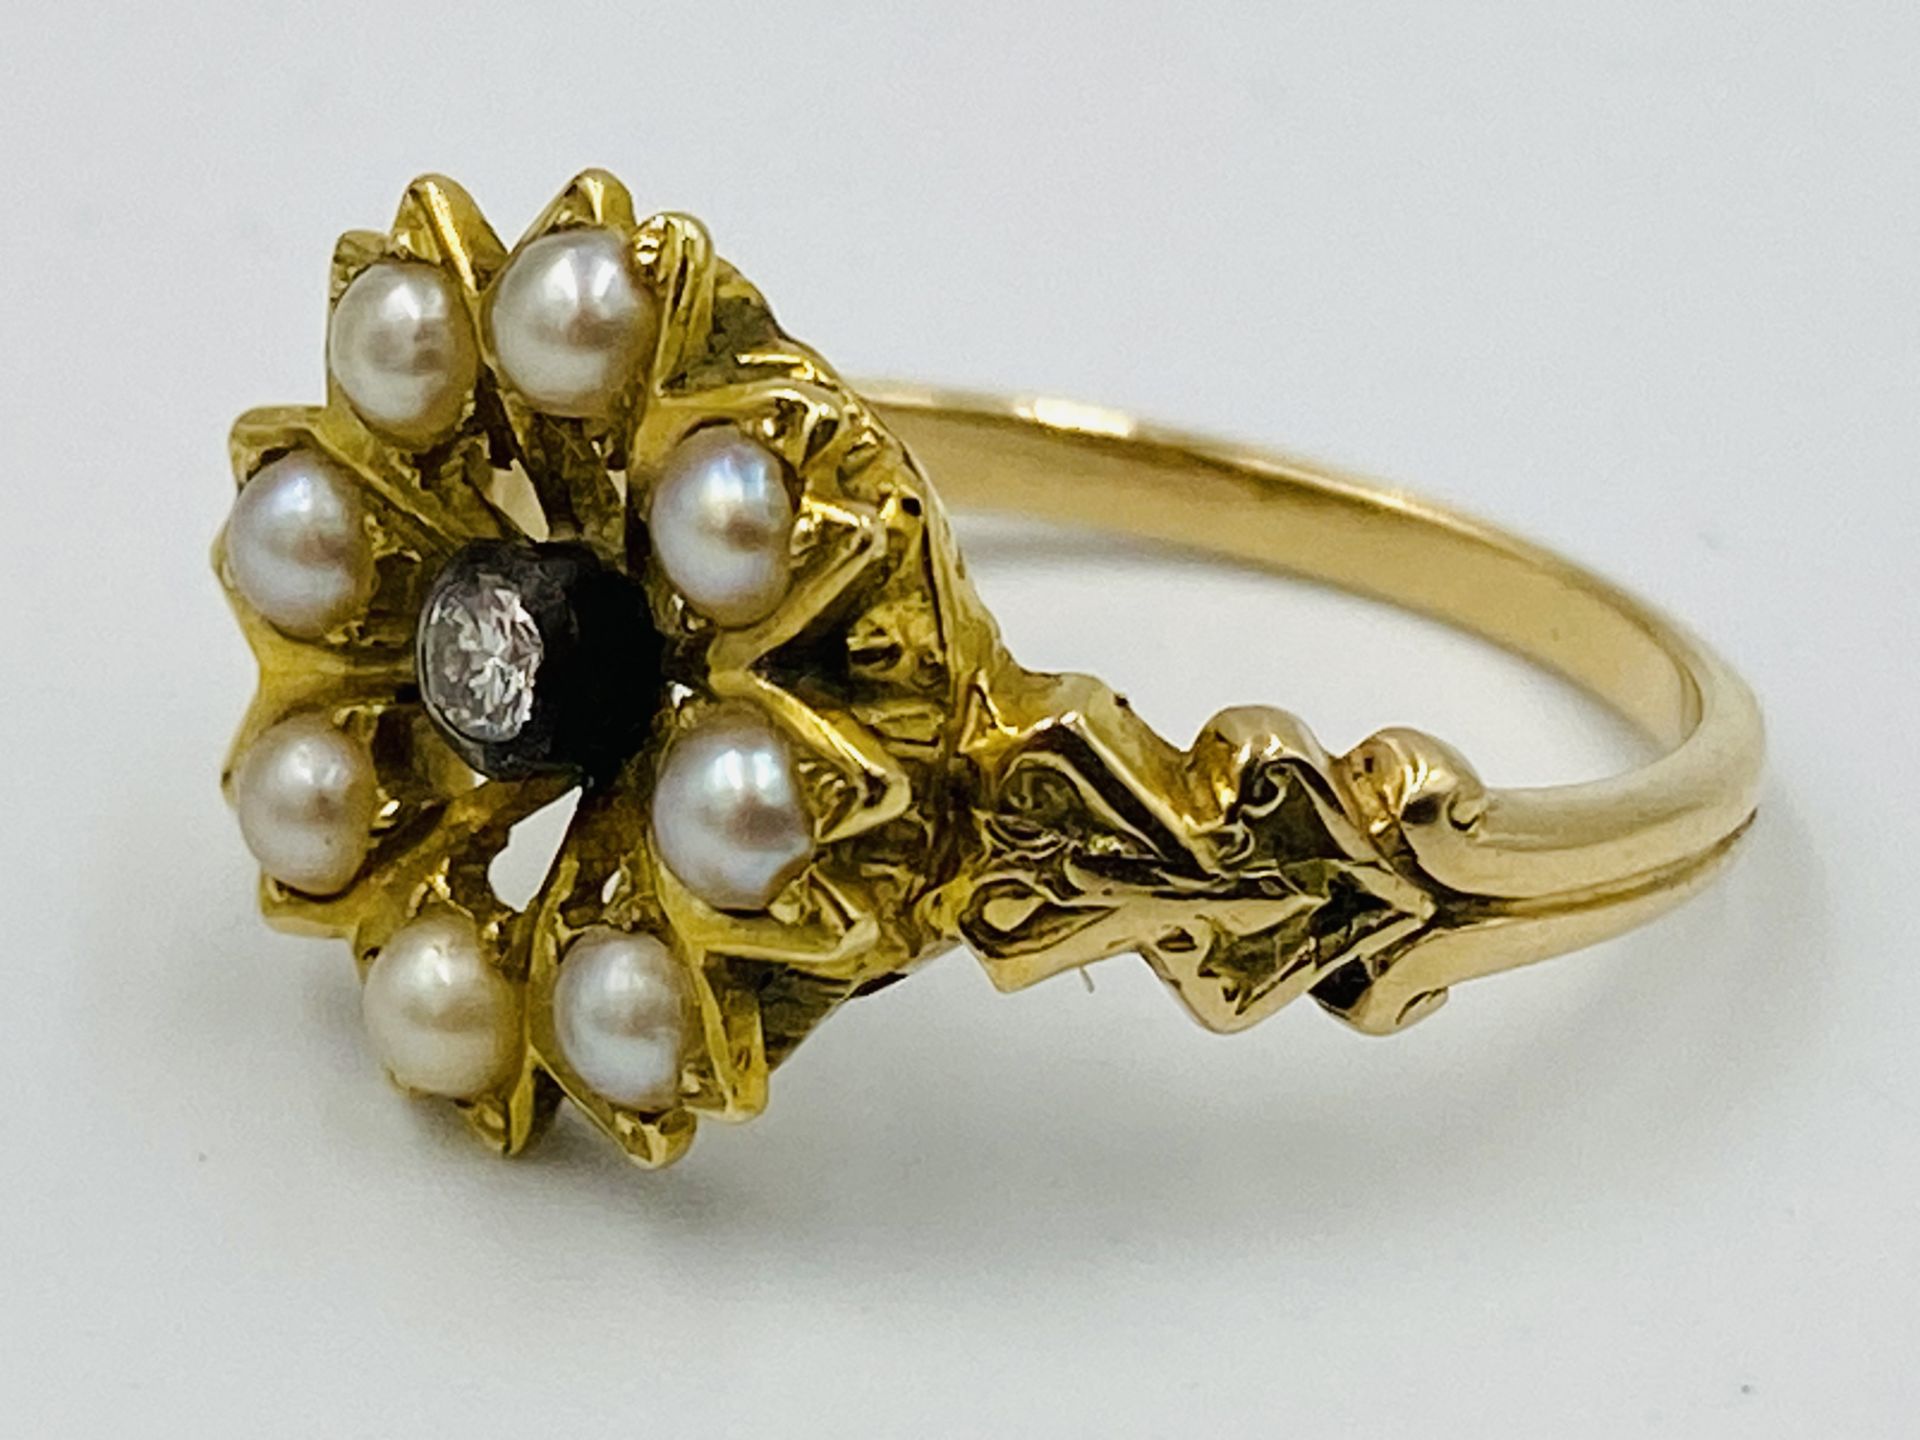 Gold, diamond and seed pearl ring - Image 2 of 4